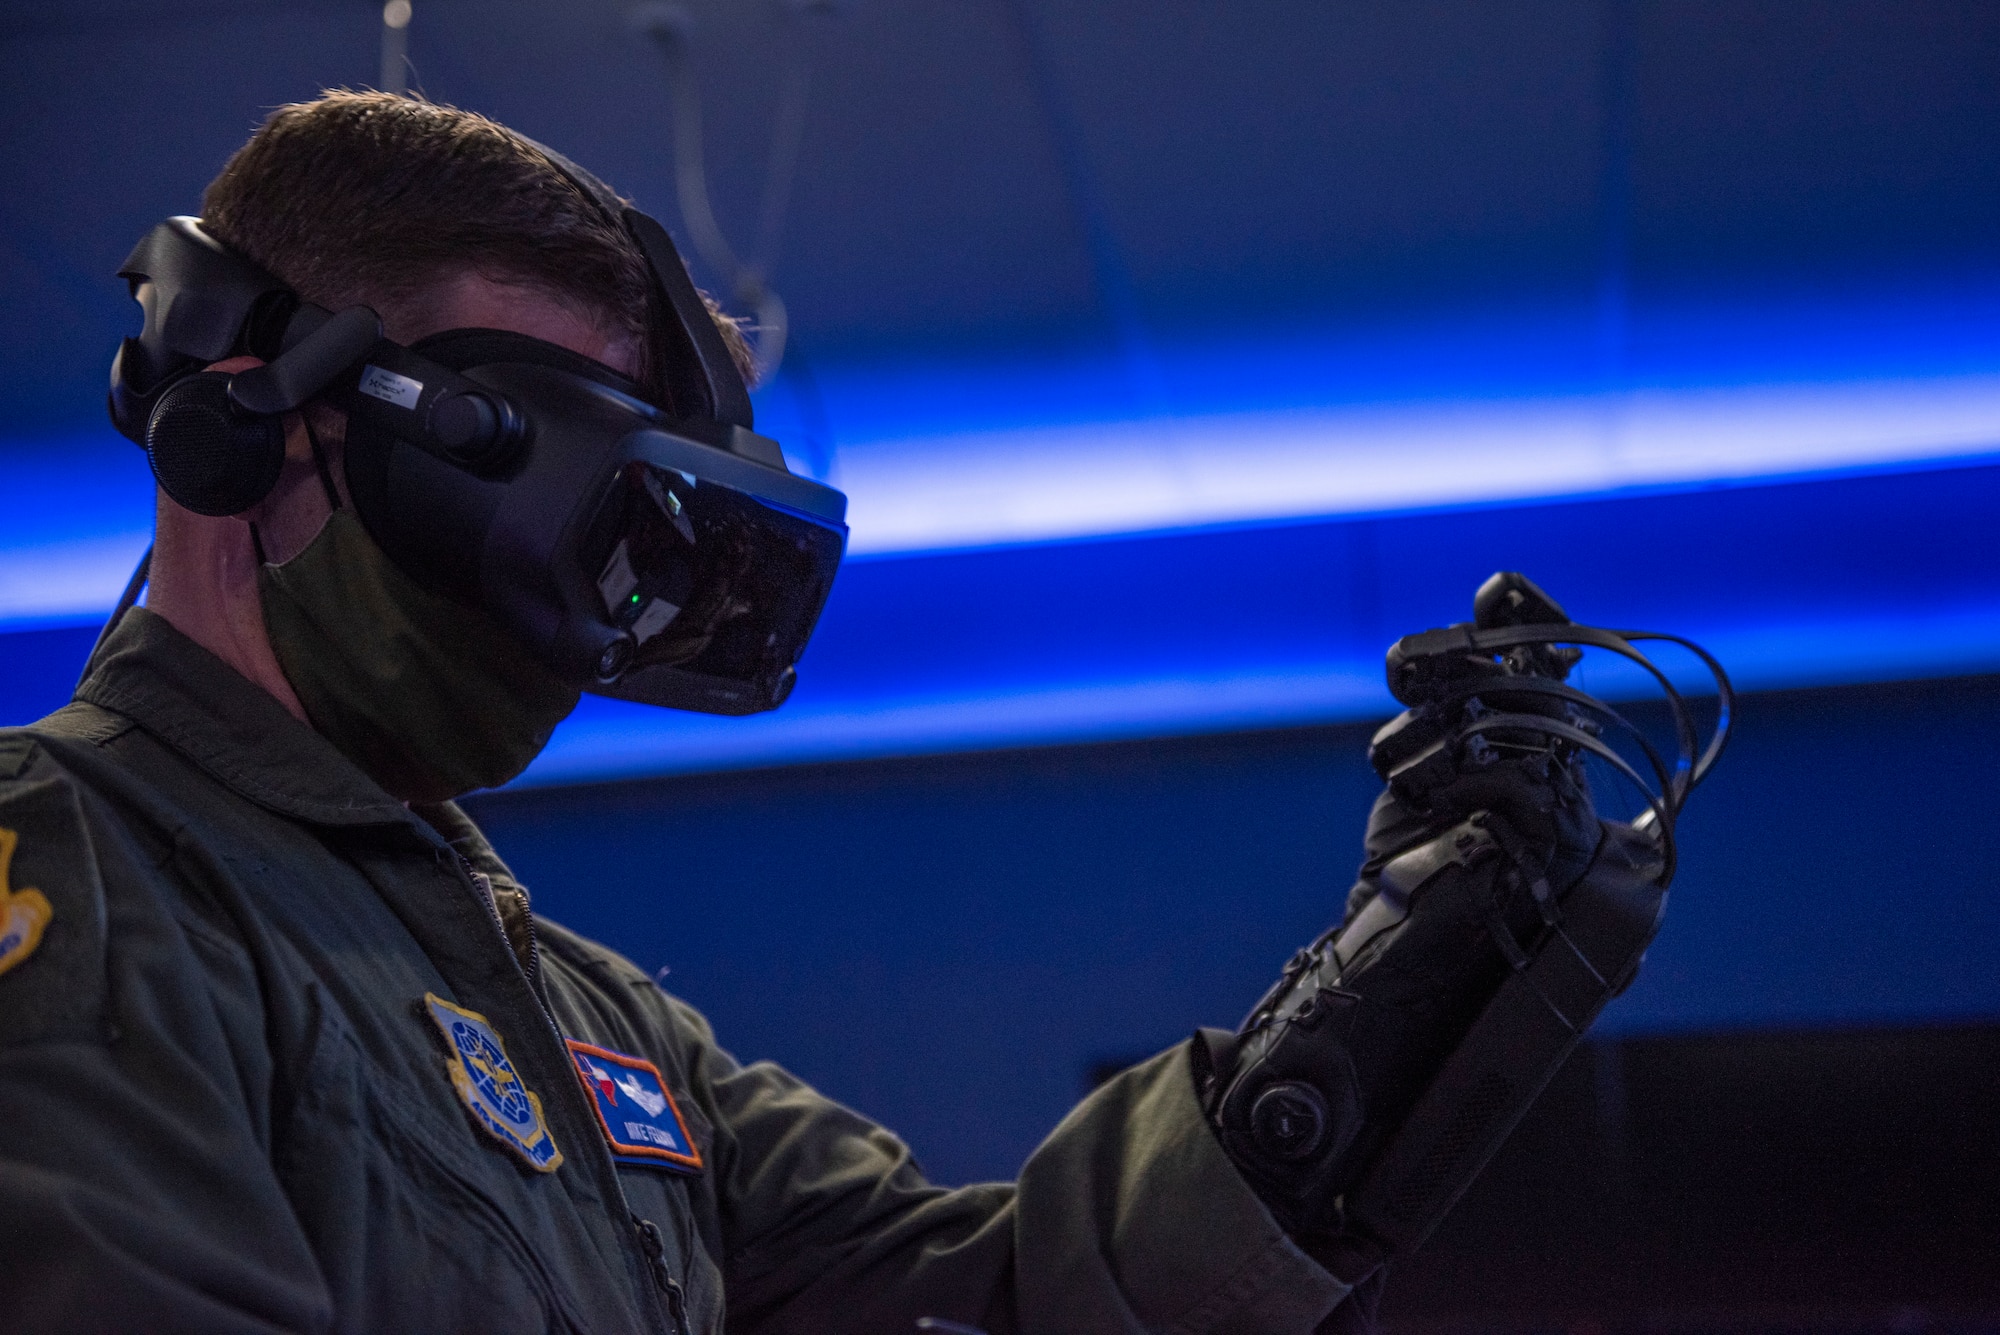 Col. Michael Fellona, 317th Airlift Wing vice commander, tests HaptX Gloves Development Kit 2 at Dyess Air Force Base, Texas, May 10, 2021. Leadership assigned to the 317th AW tested the DK2 Gloves where they saw first-hand how the gloves operated and could potentially integrate with the existing virtual reality training lab. (U.S. Air Force photo by Airman 1st Class Colin Hollowell)